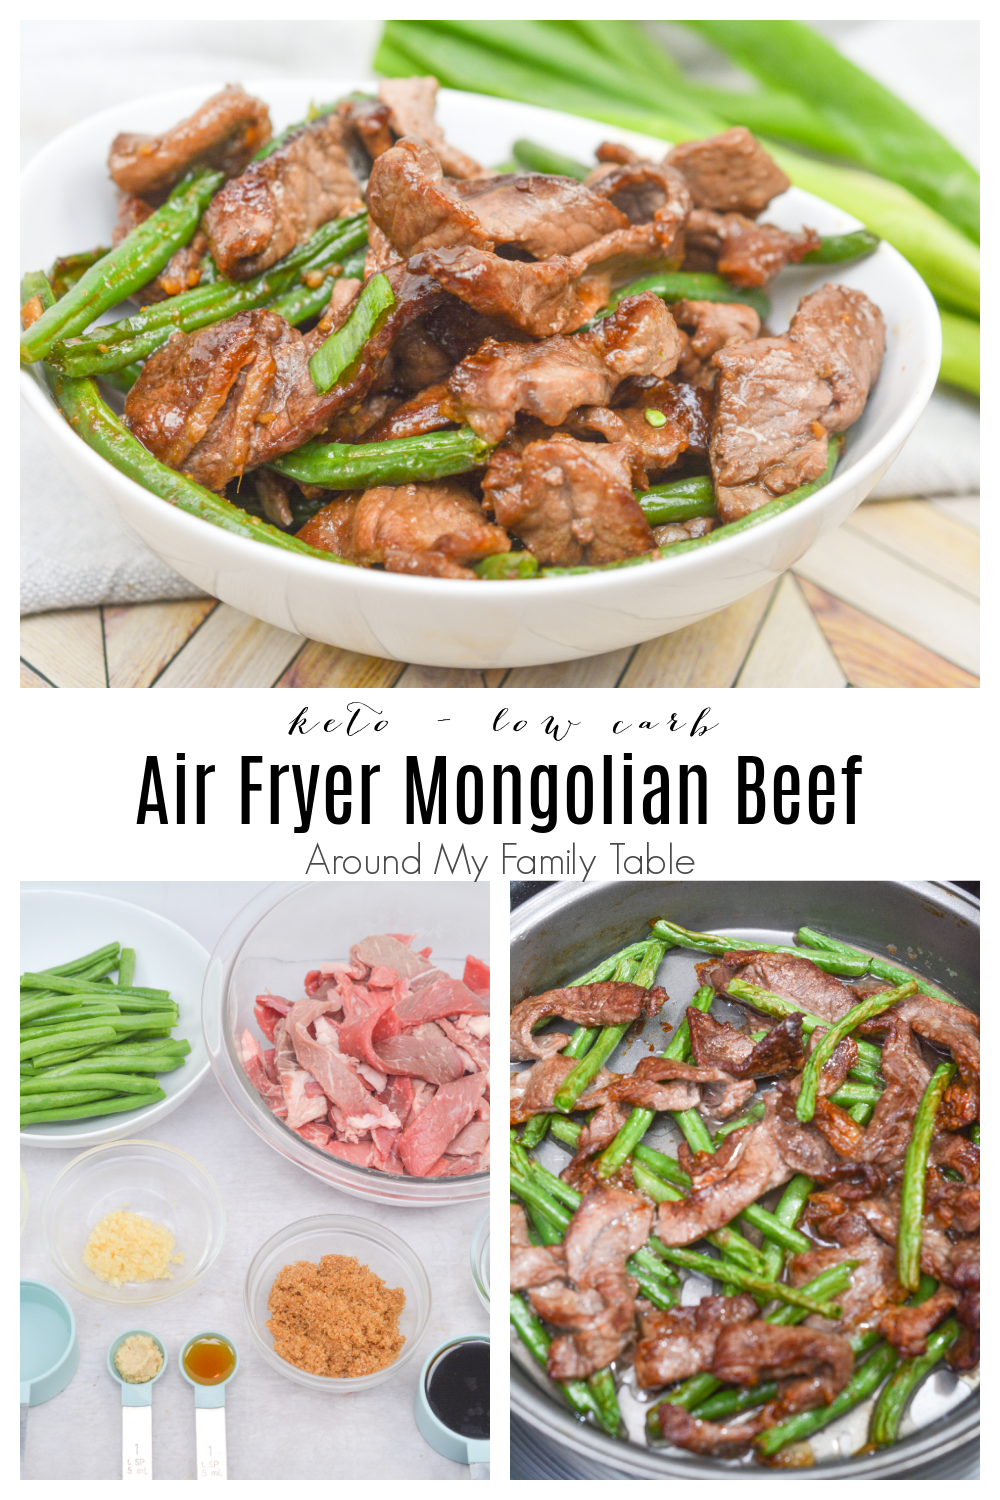 You don't have to give up Chinese food just because you're on a low carb or keto diet!  My Keto Air Fryer Mongolian Beef tastes just as good as take out with less calories and carbs than traditional Mongolian Beef. via @slingmama